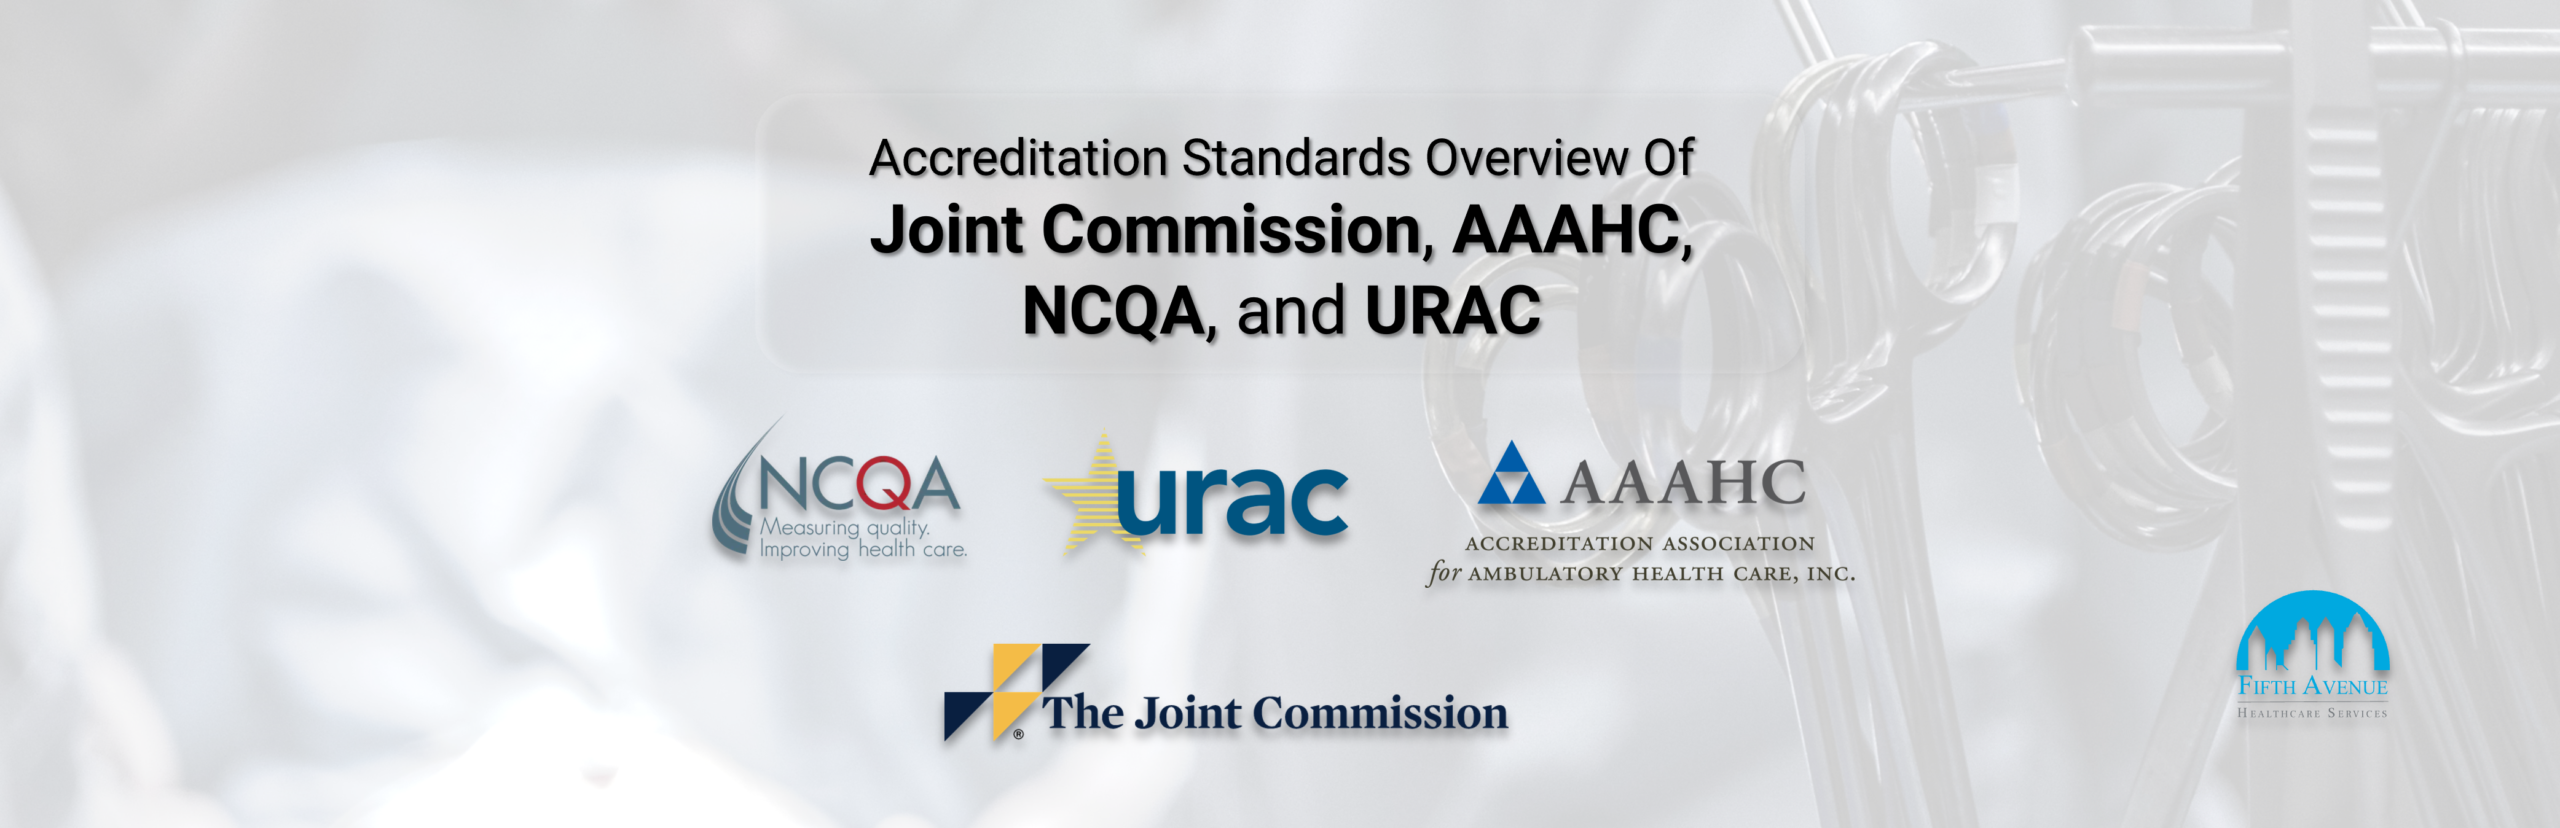 Credentialing Accreditation Standards